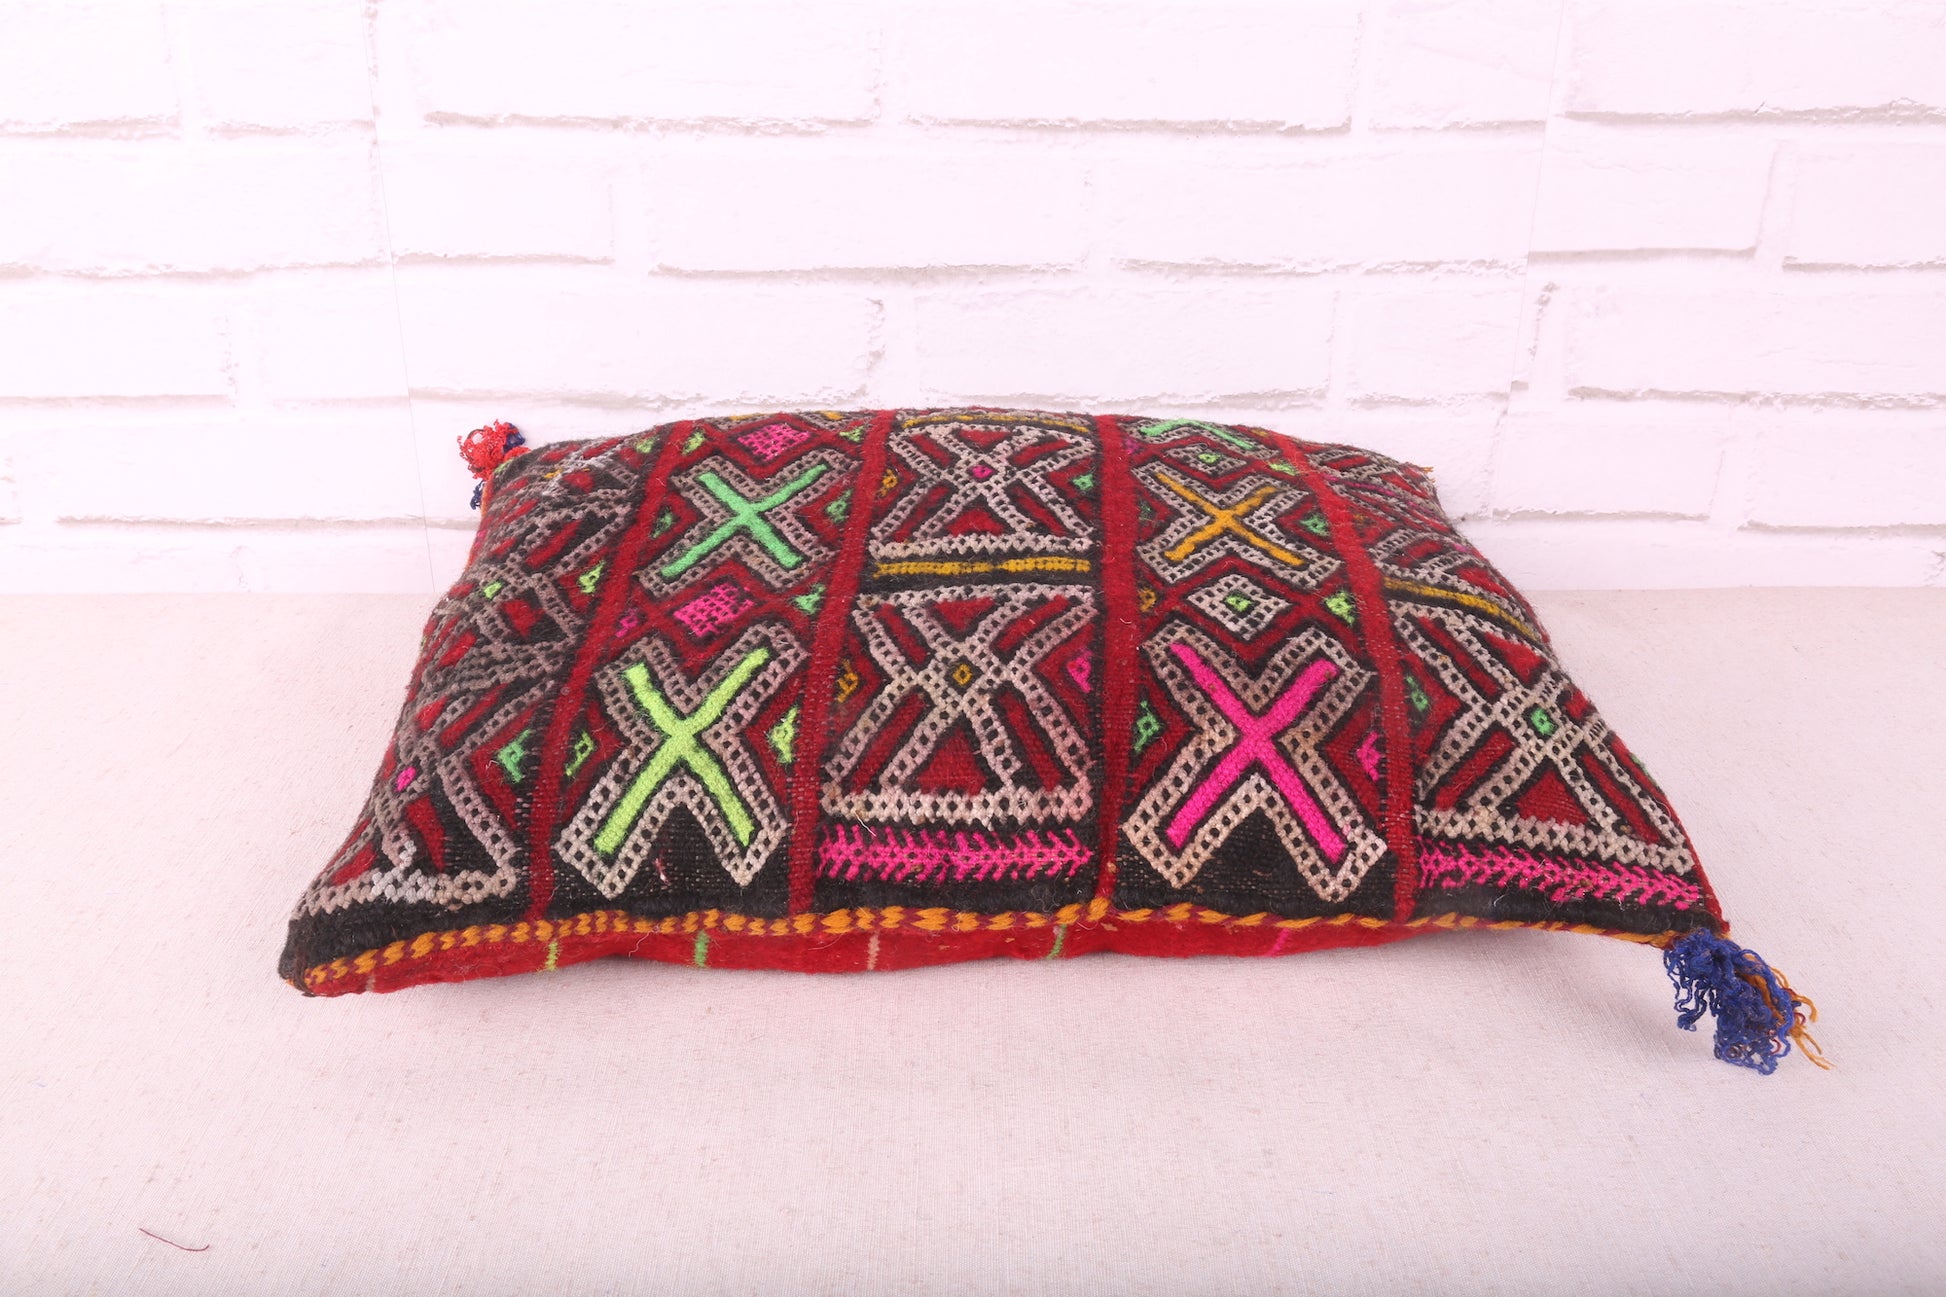 Handmade Moroccan pillow kilim 14.9 inches X 17.7 inches